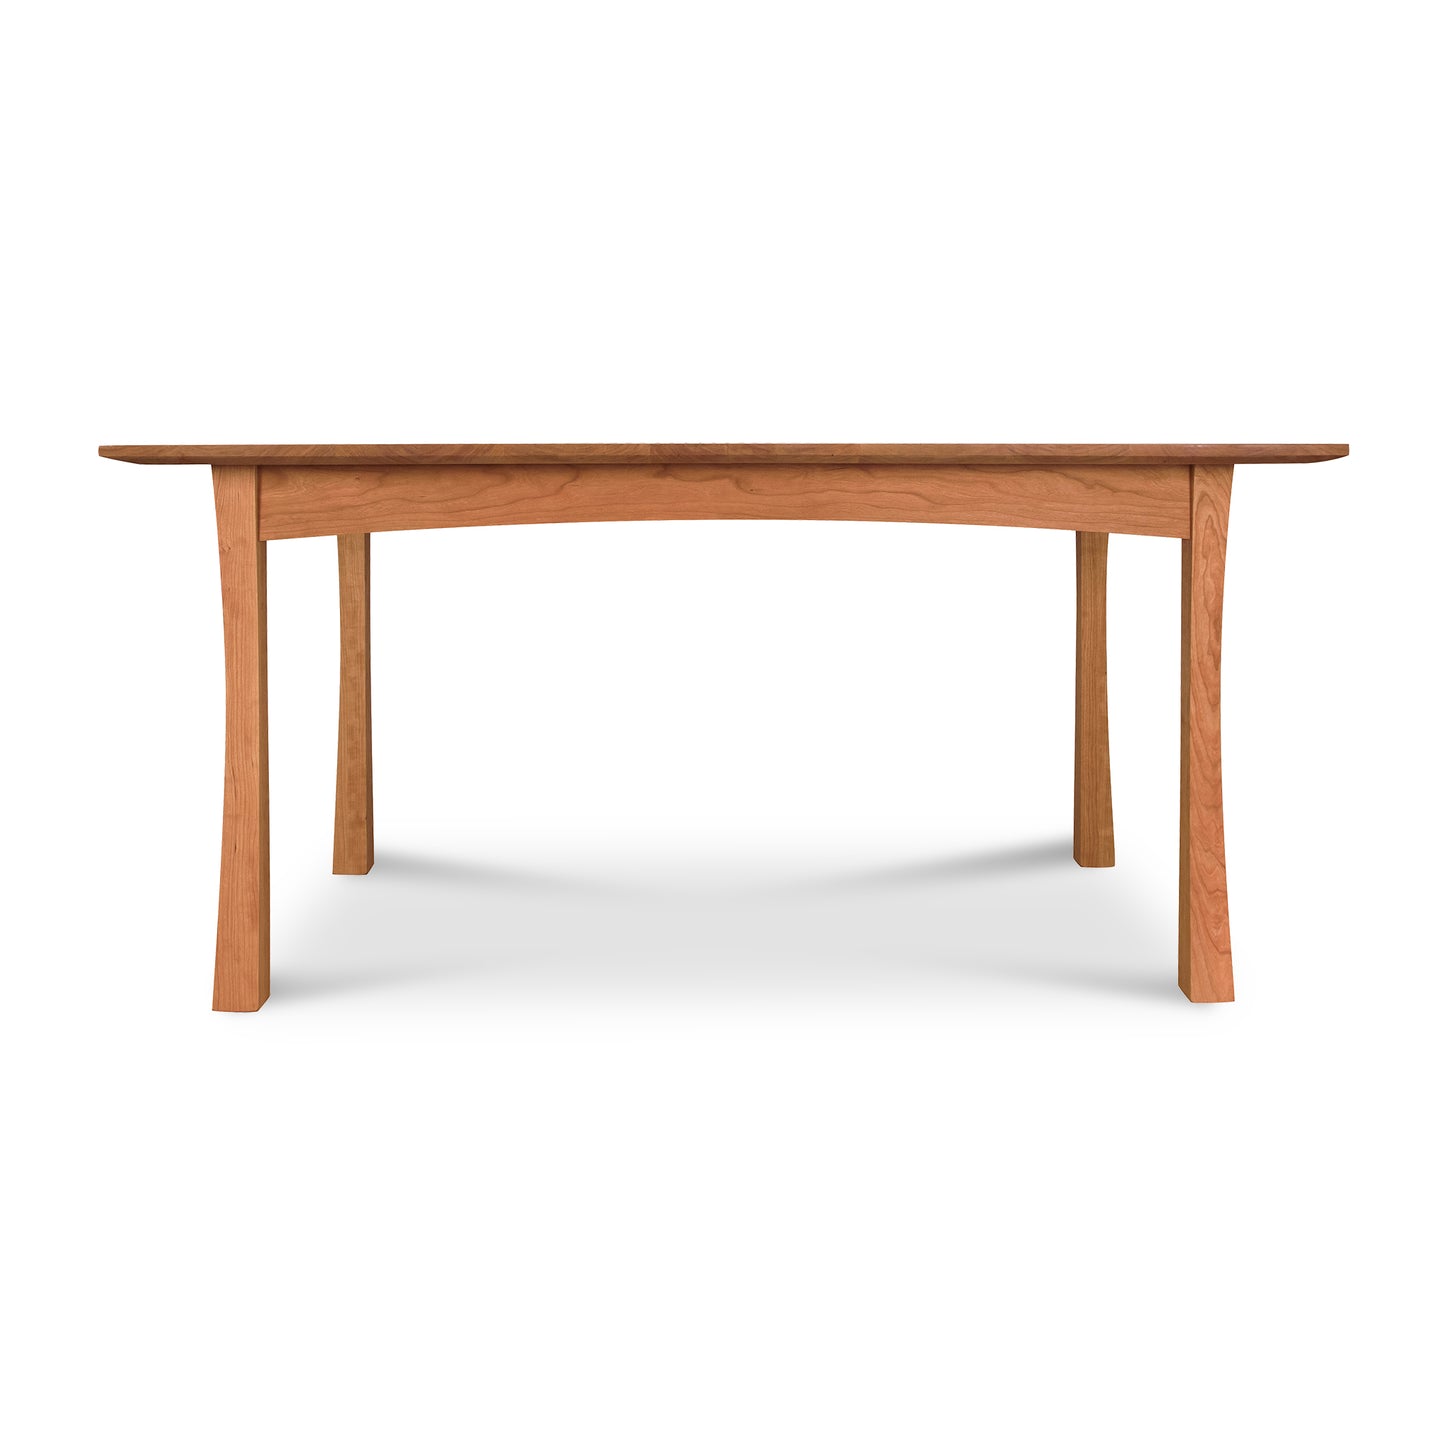 A Vermont Furniture Designs Contemporary Craftsman Solid Top Dining Table on a white background.